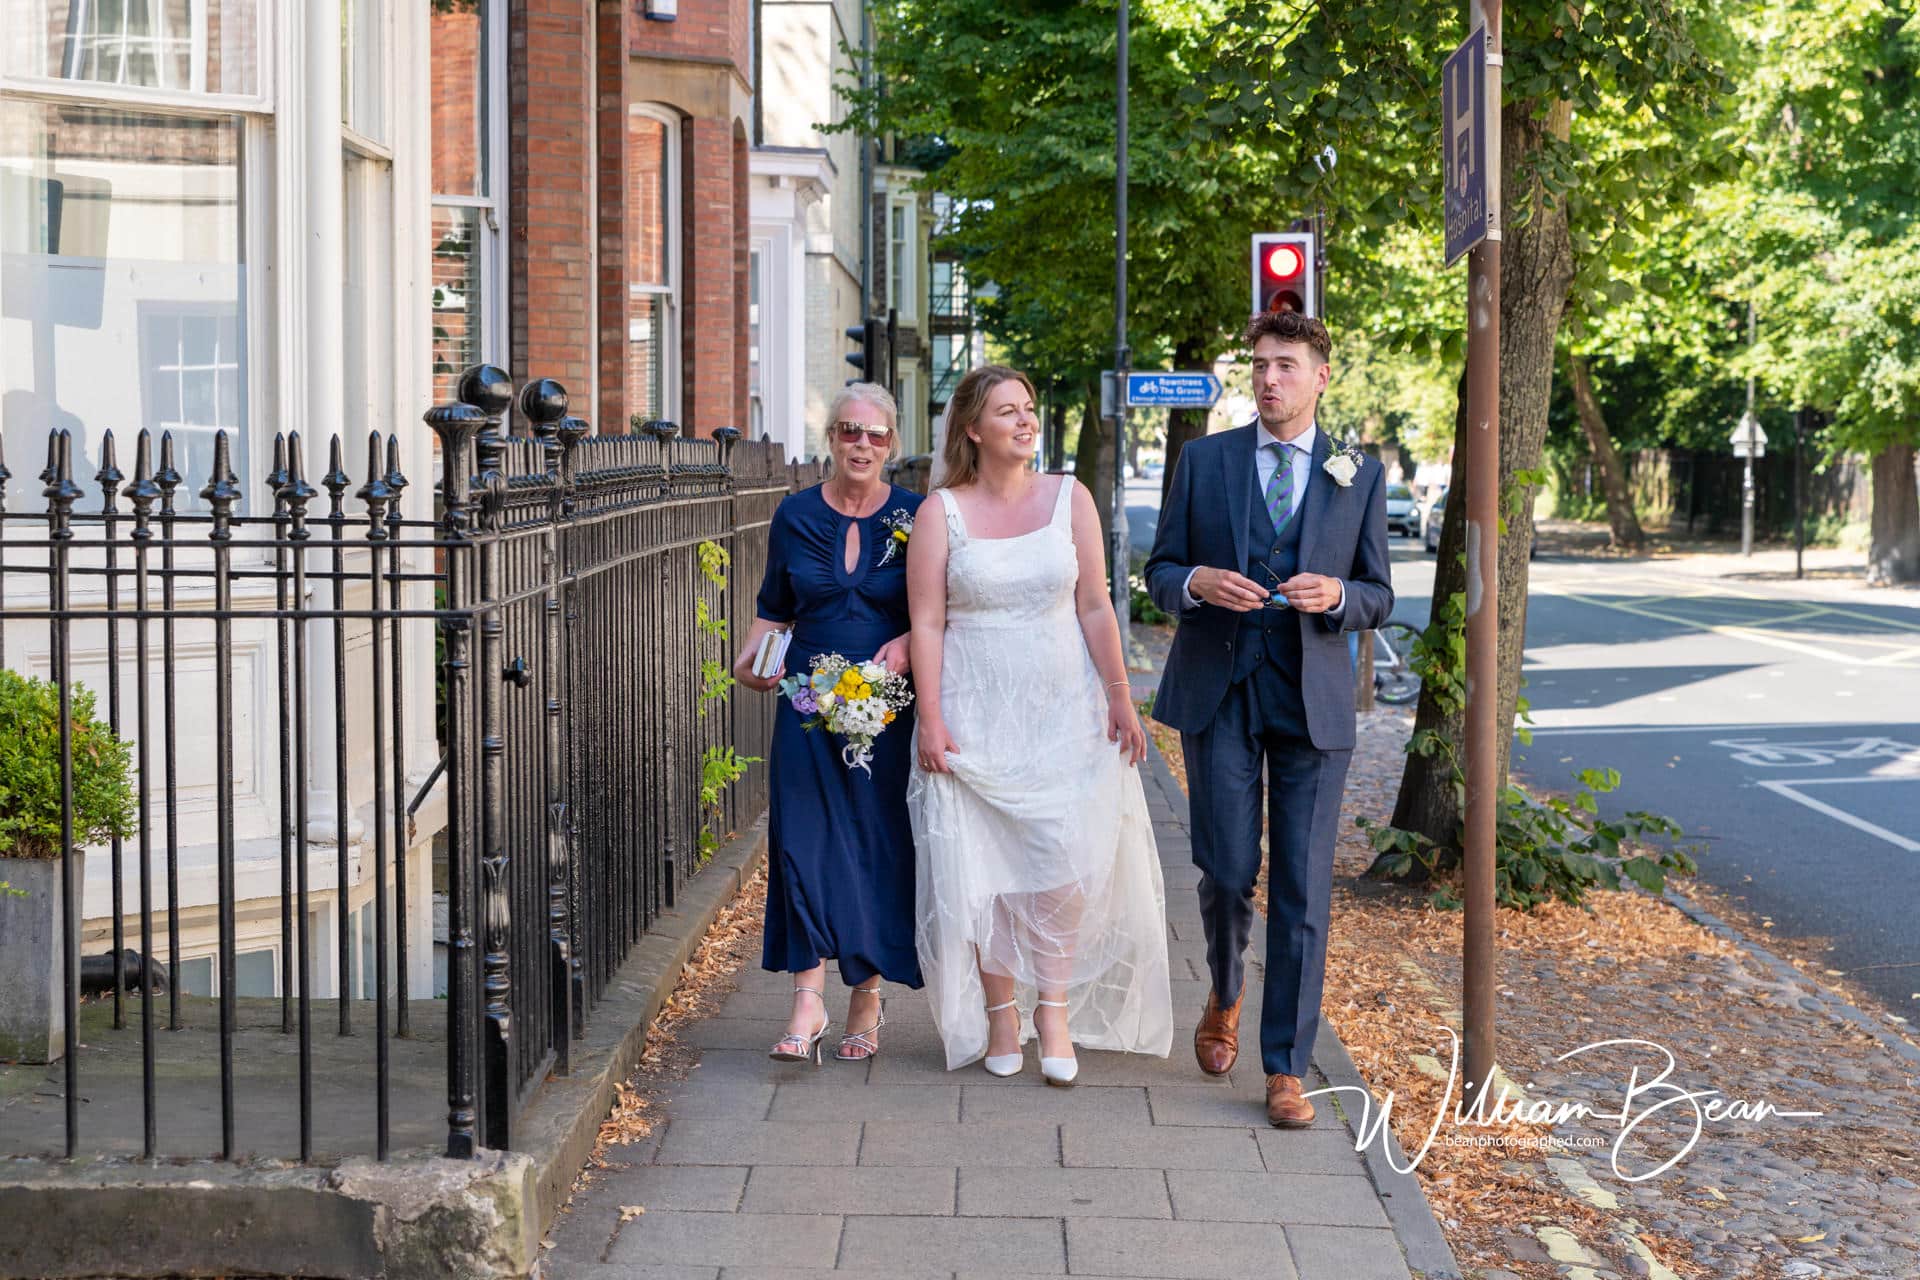 002-wedding-photography-bootham-suite-york-registry-office